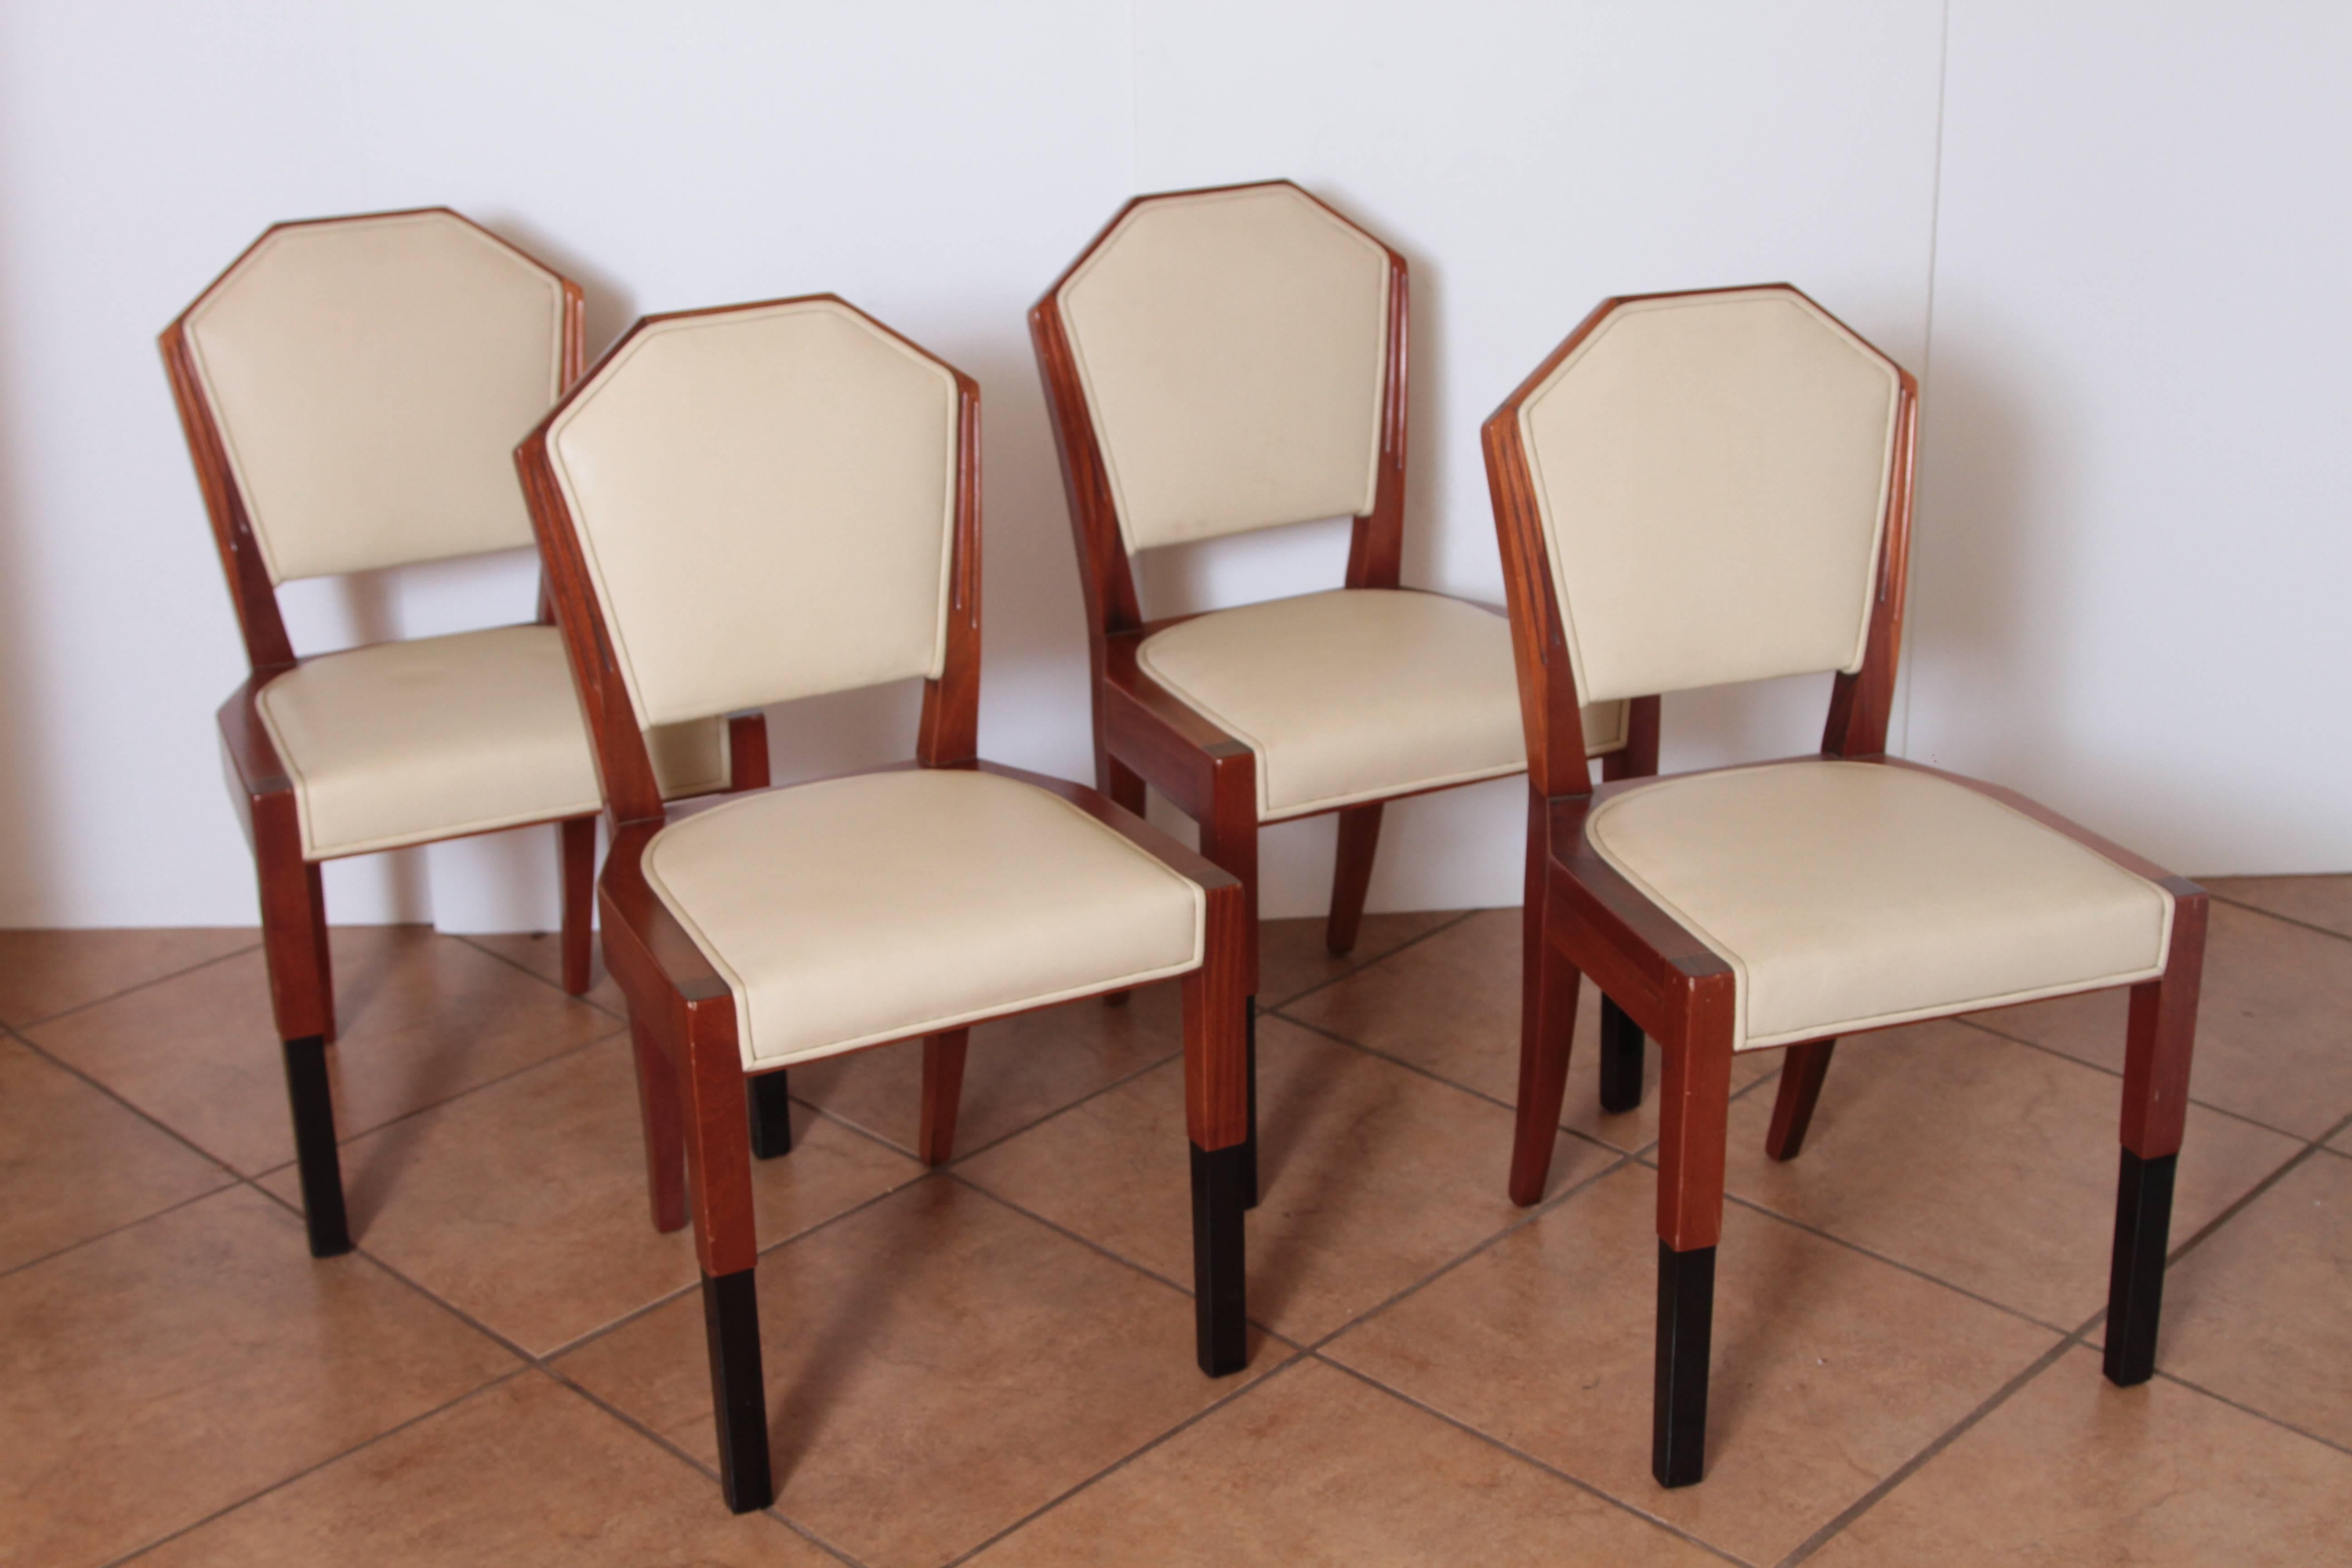 Art Deco Dynamique Creations set of four side chairs Johnson Furniture Co.  David Robertson Smith

Important Art Deco Dynamique Creations set of four side chairs for Johnson Handley Johnson.
Design by David Robertson Smith for Johnson Furniture Co.,